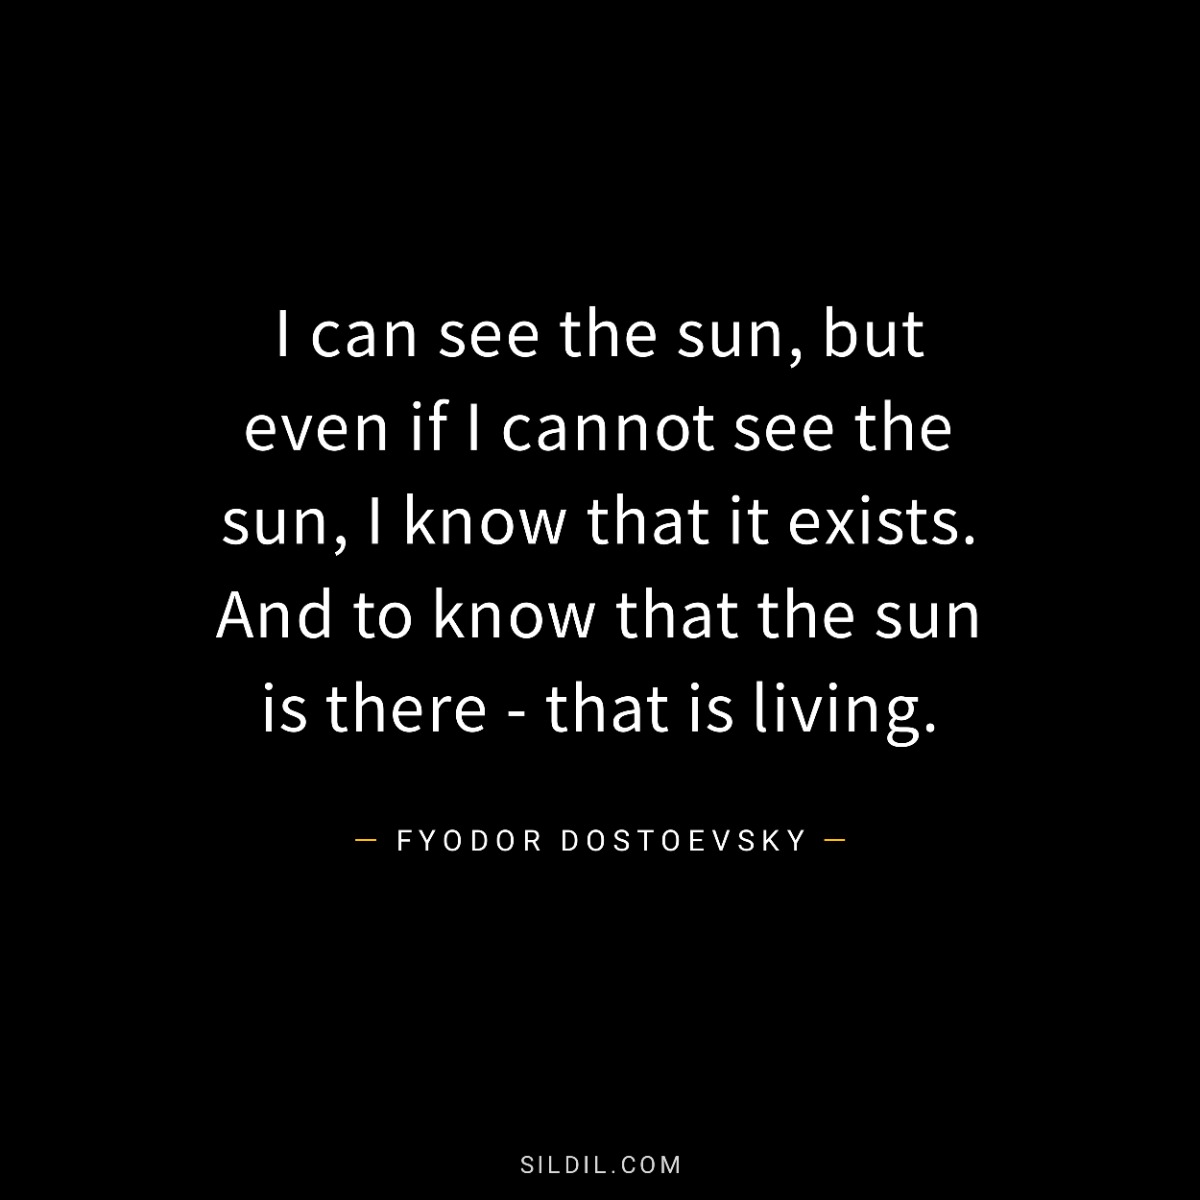 I can see the sun, but even if I cannot see the sun, I know that it exists. And to know that the sun is there - that is living.